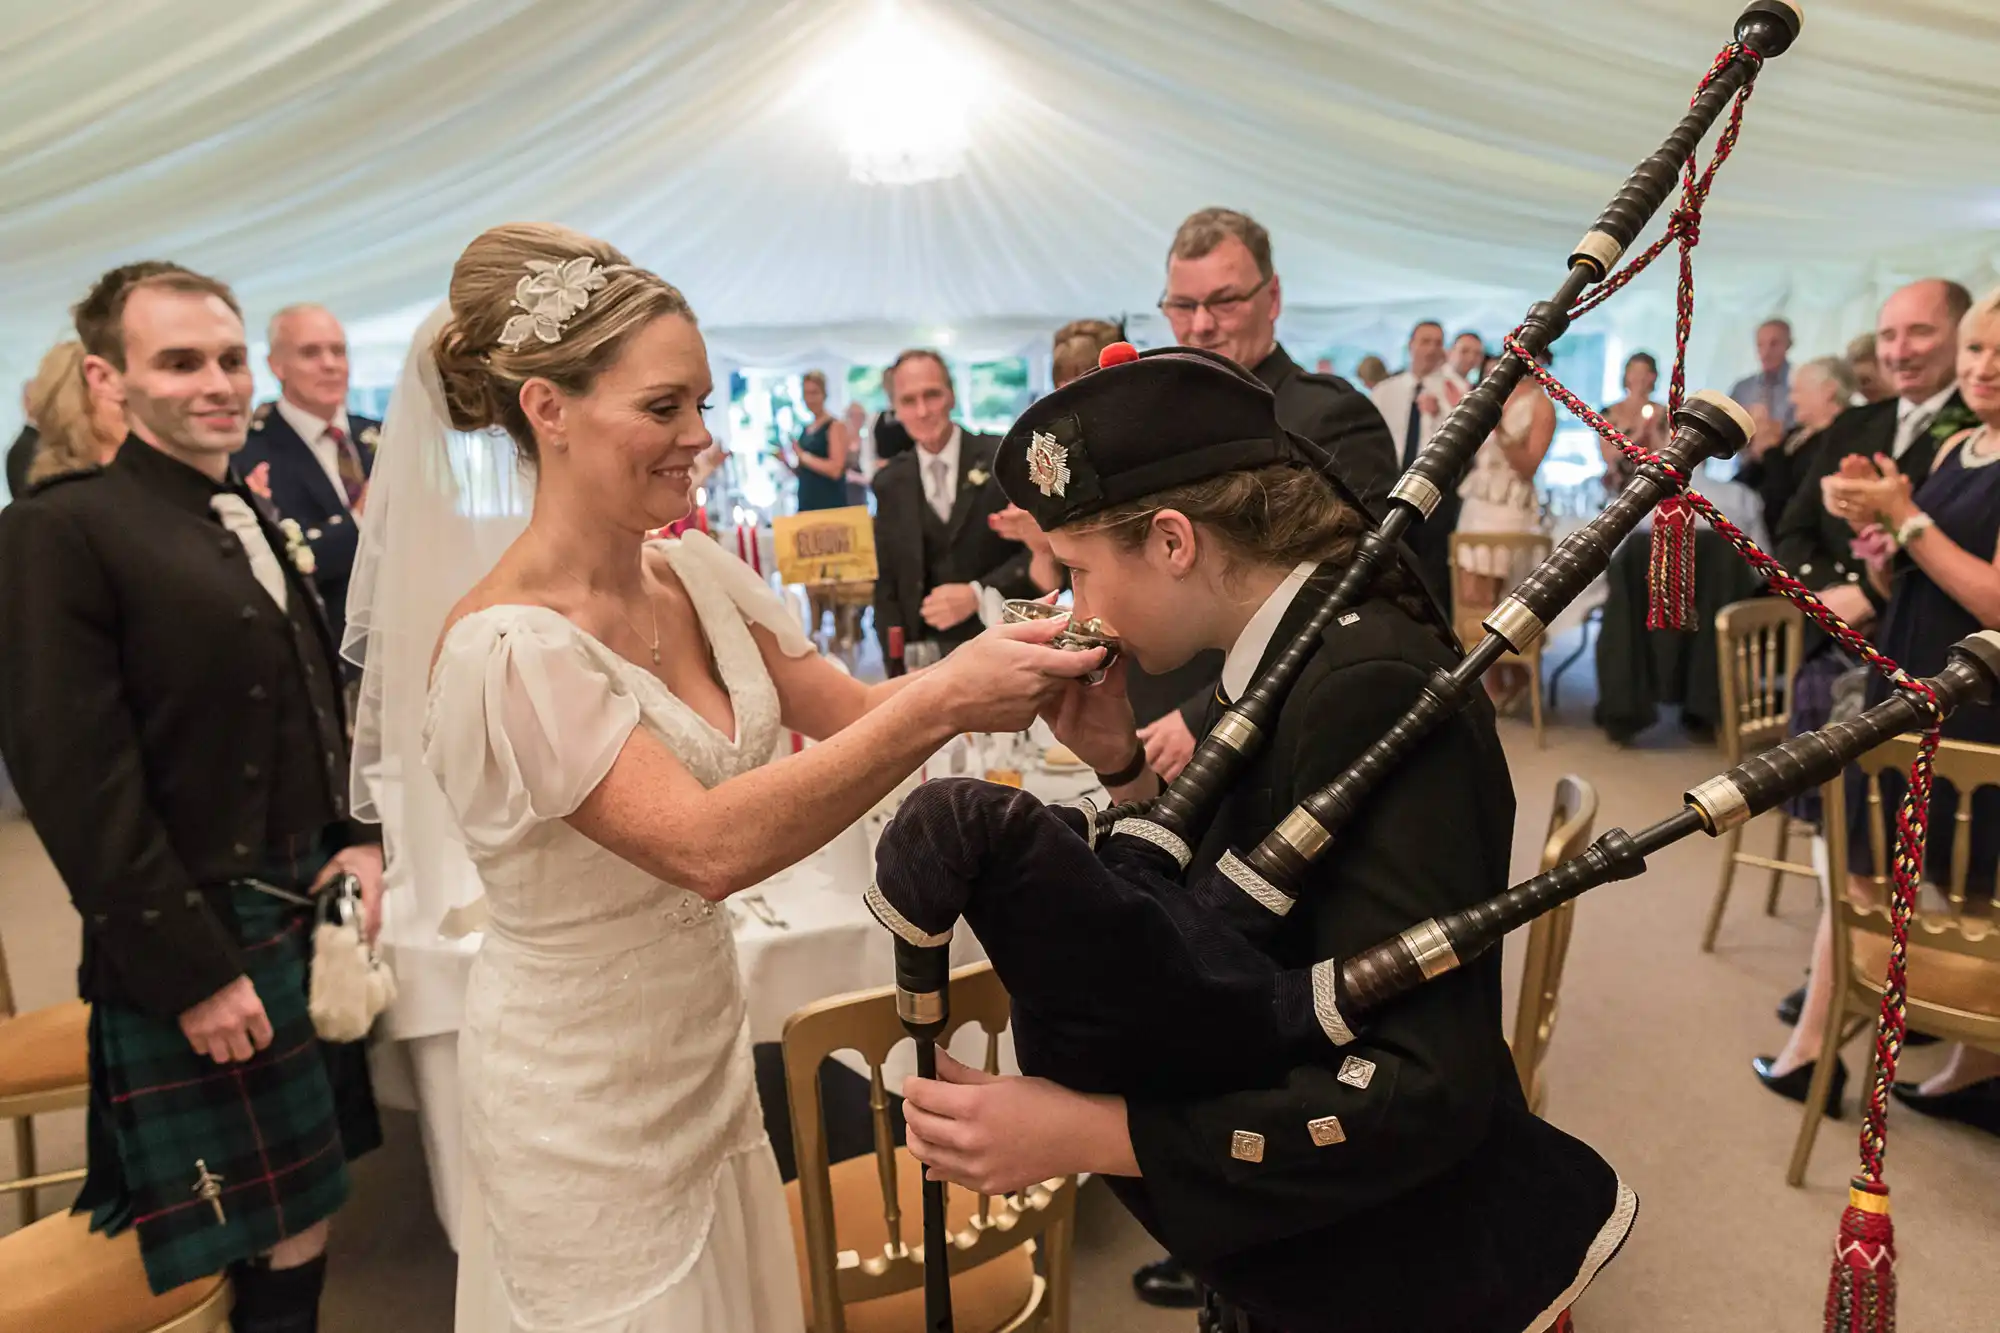 A bride in a white dress offers a drink to a young girl playing bagpipes at a wedding reception, with guests in formal attire watching.